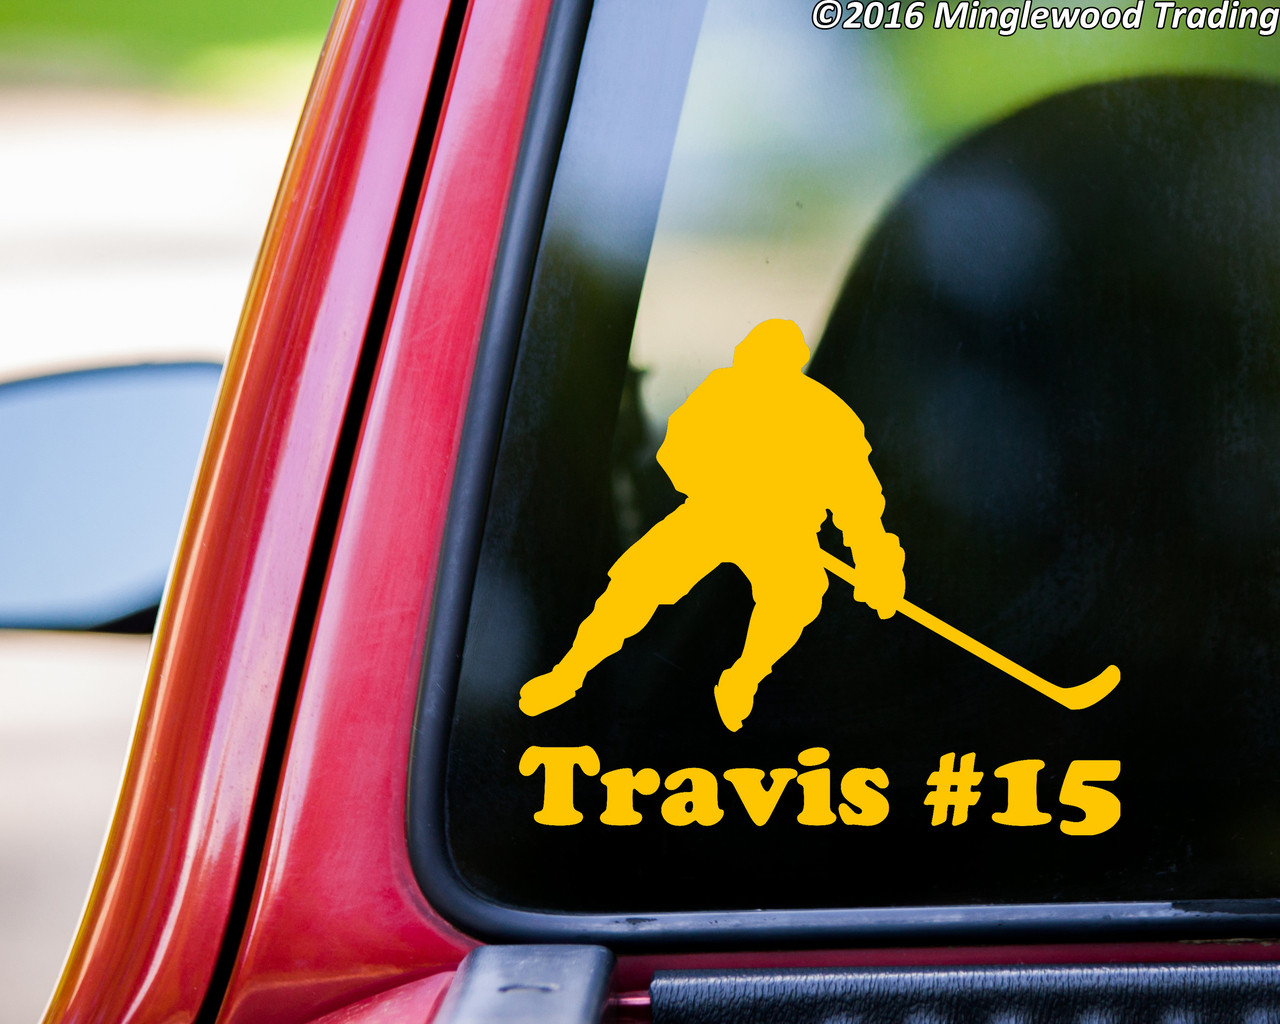 Ice Hockey Player V2 Vinyl Decal with Personalized Name - Stick Puck - Die Cut Sticker